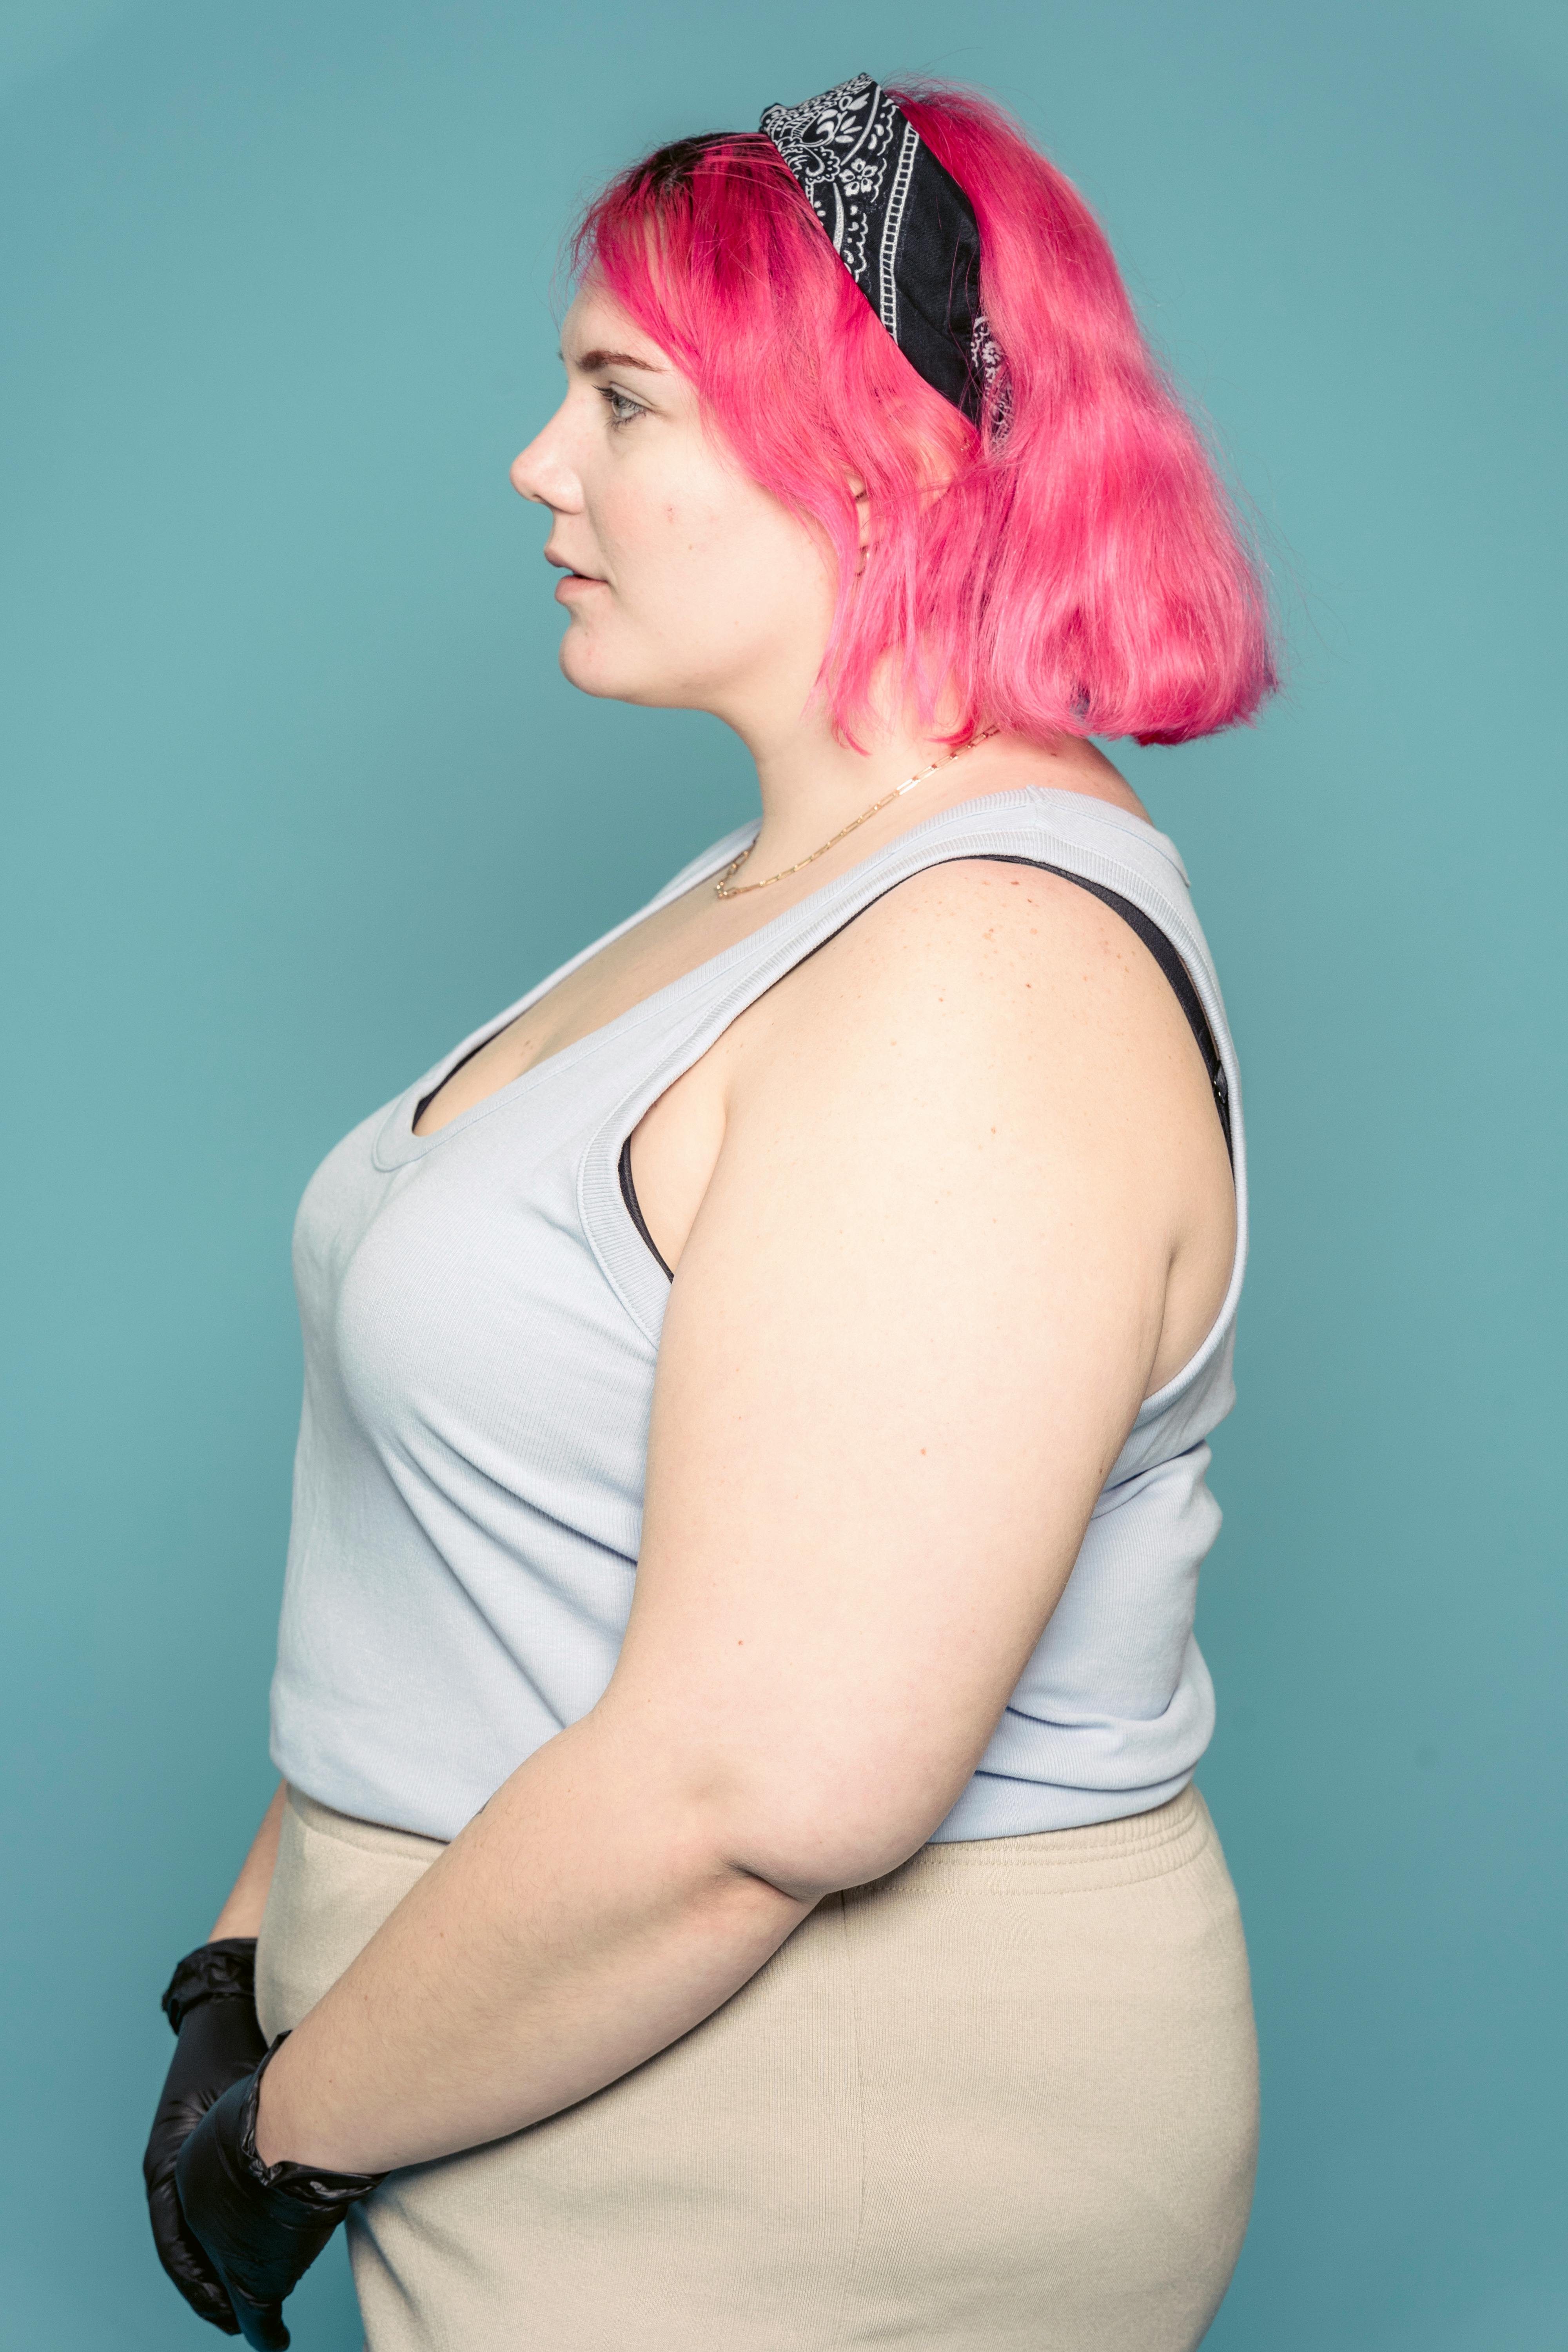 Plus size stylist with pink hair · Free Stock Photo